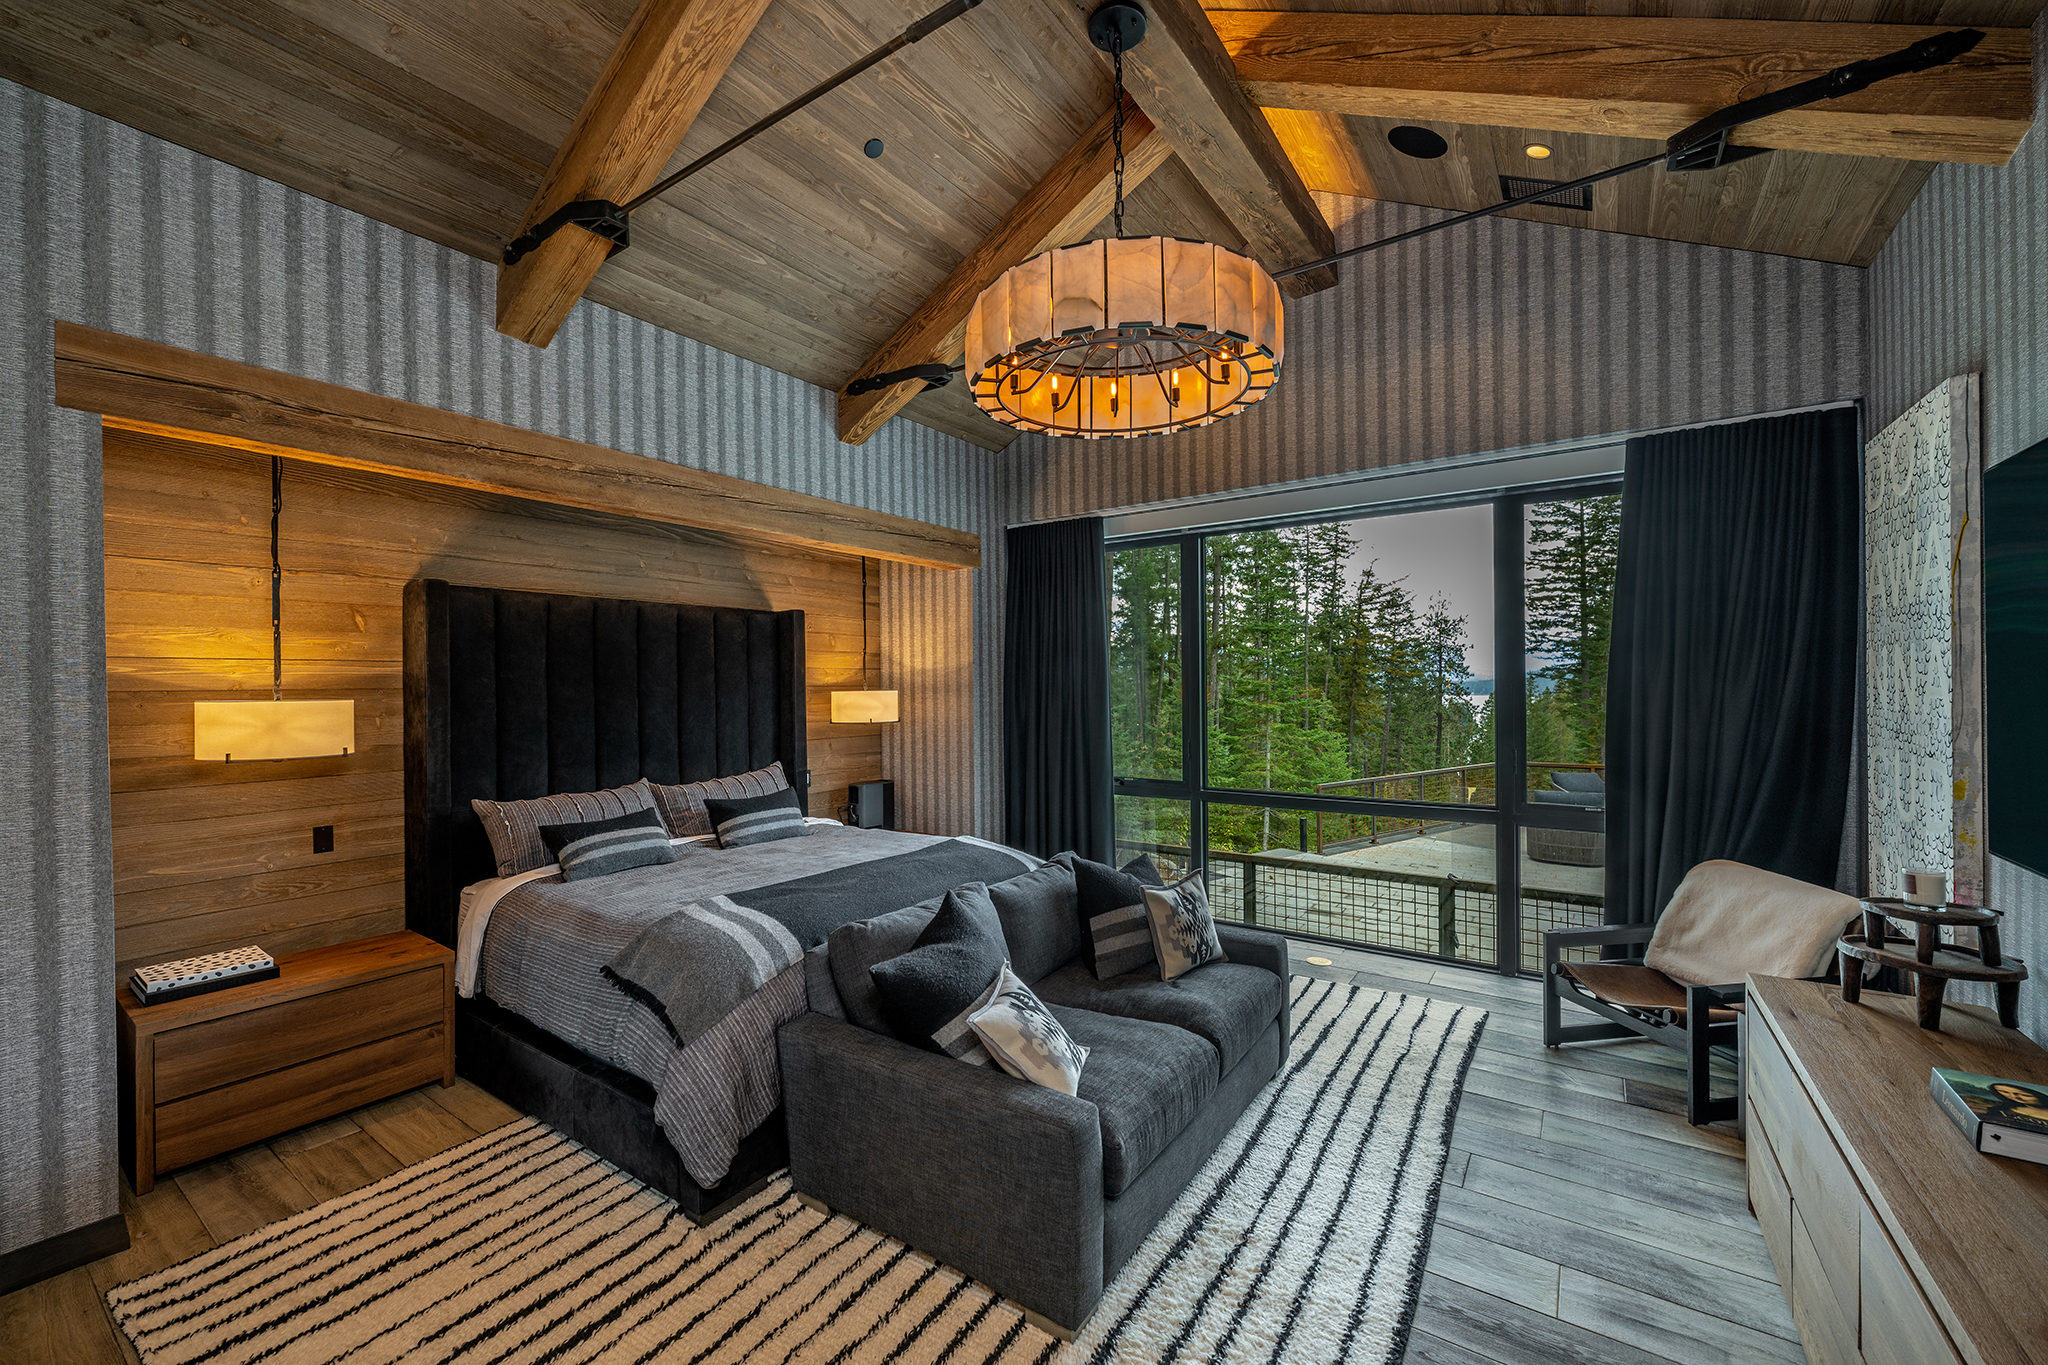 The primary bedroom features custom reclaimed timber and steel designed by Eric Hedlund Design